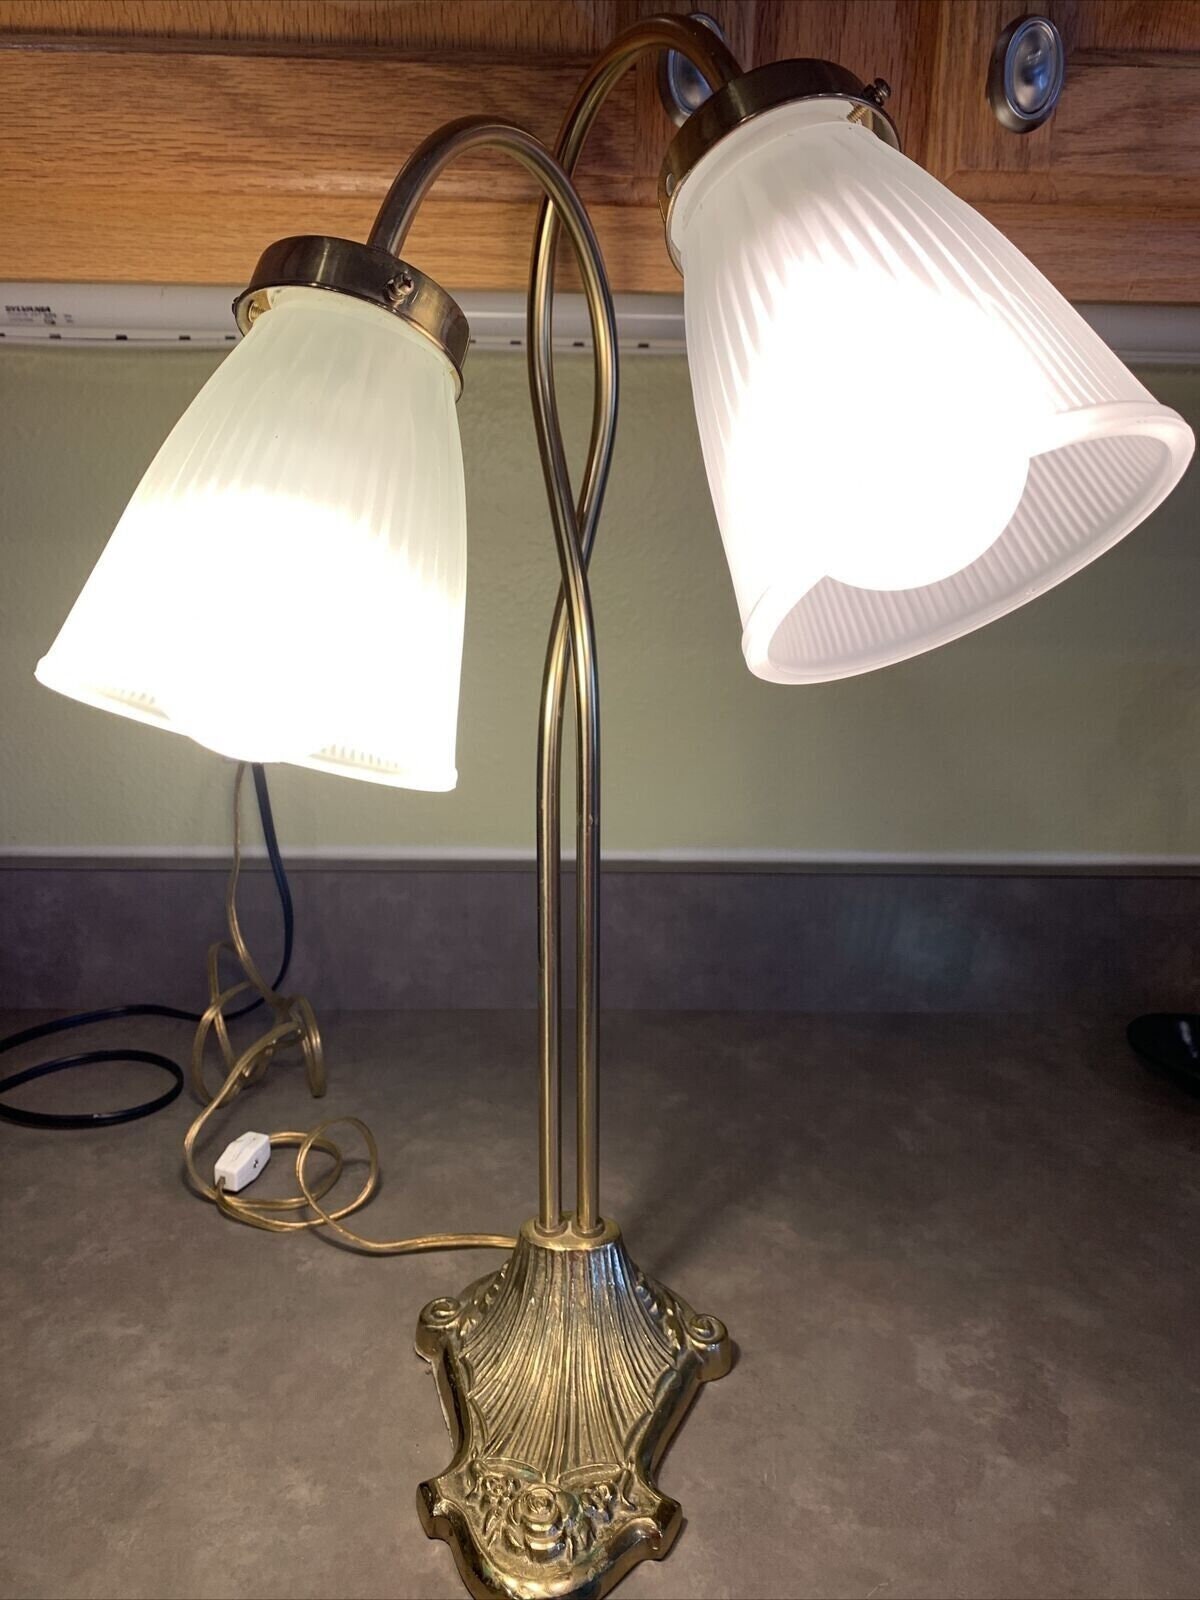 Vintage Lamp-goose Neck/lily Pad Table Lamp by Grandlite. 